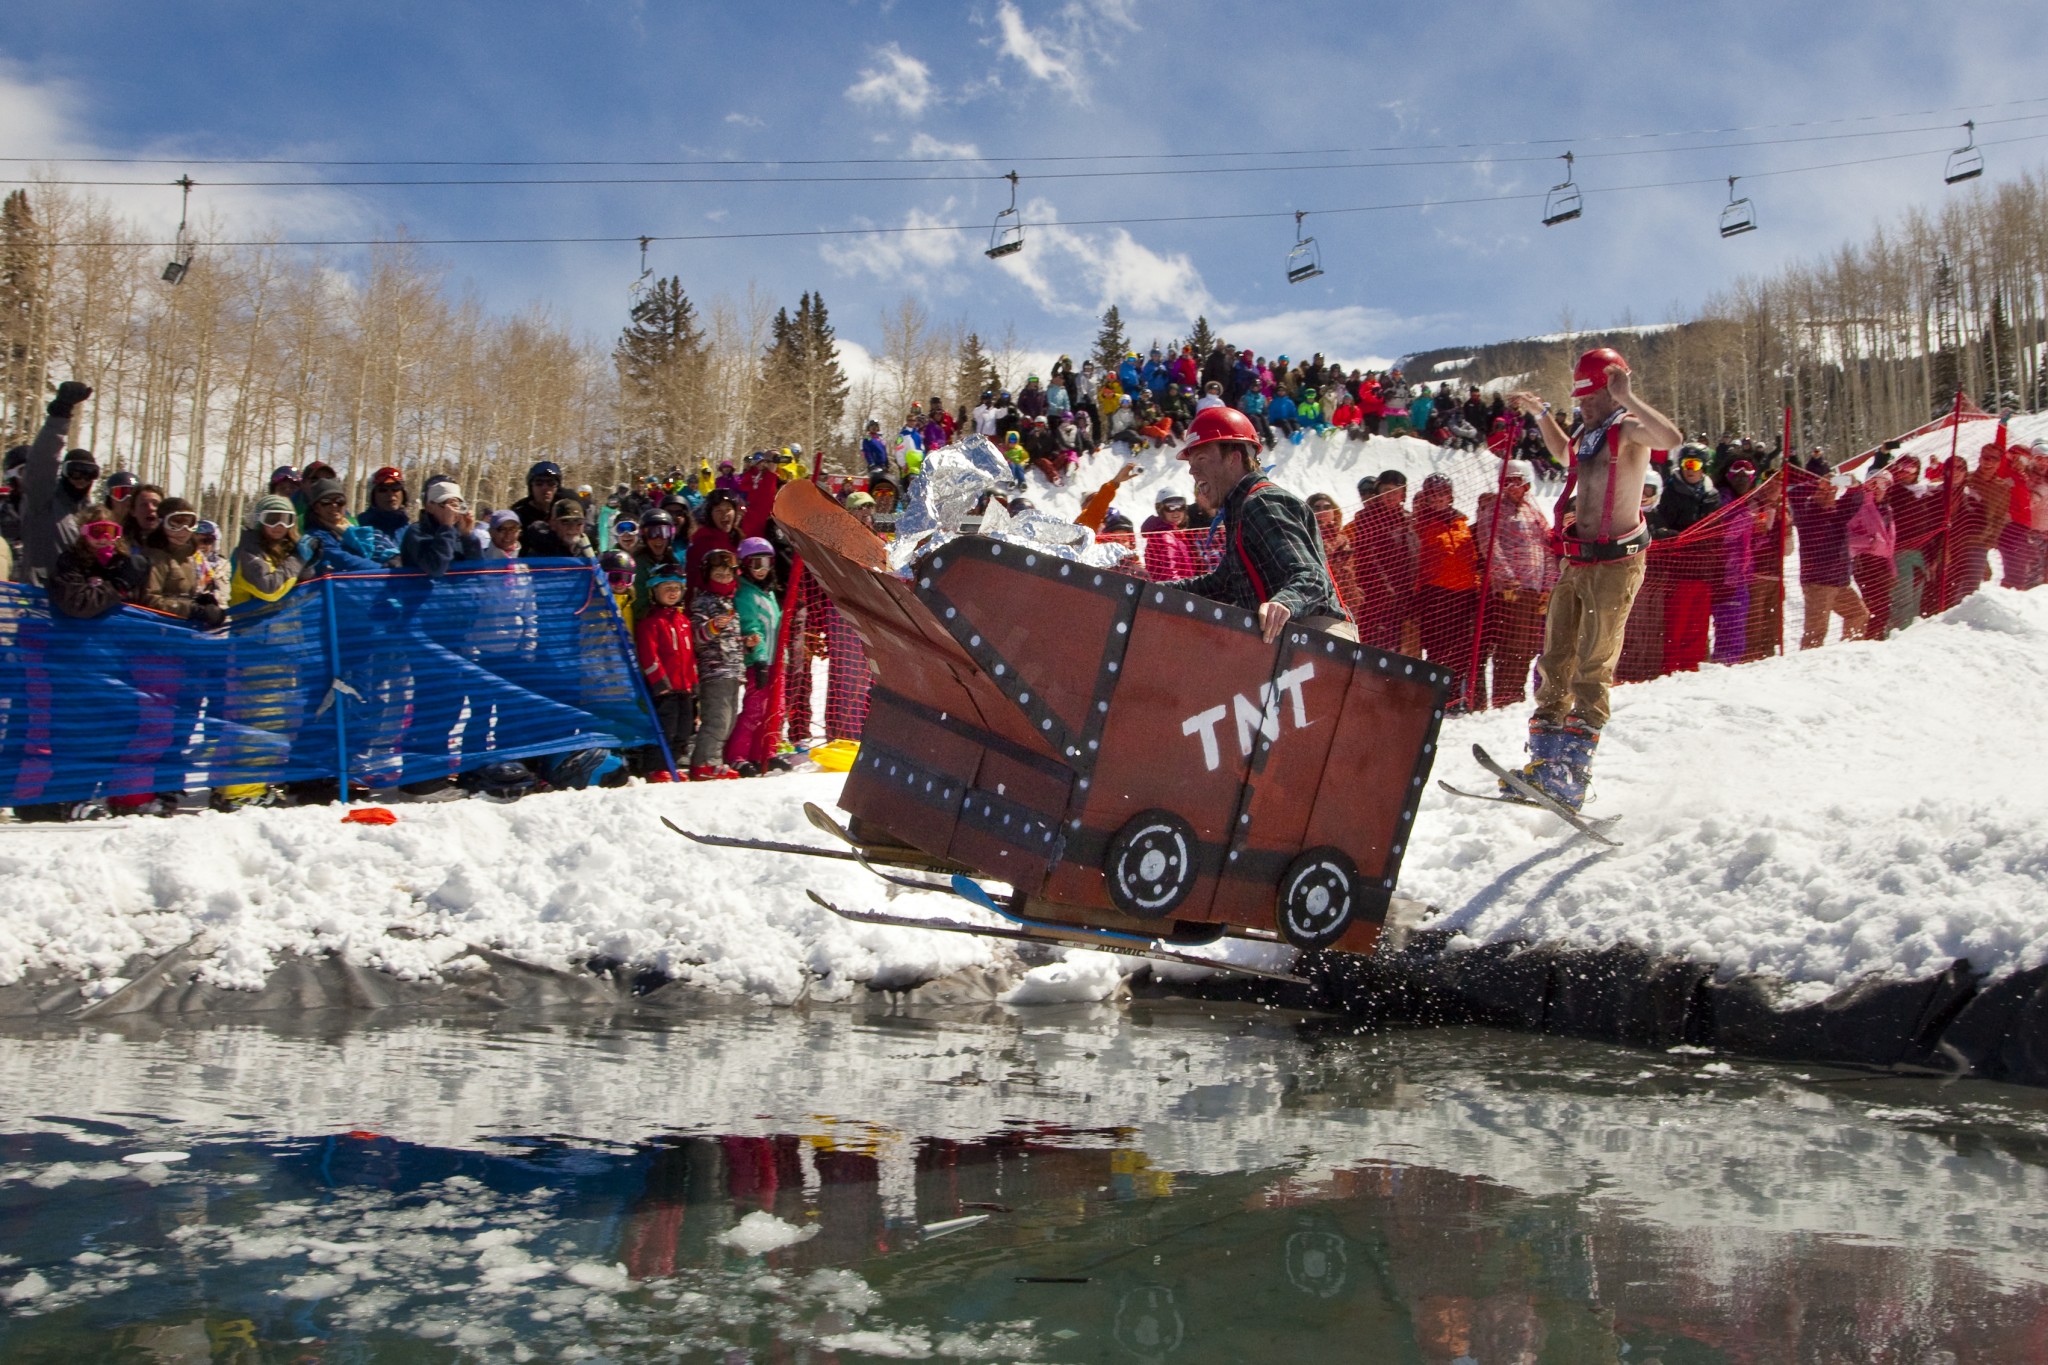 [EVENT] Splash Down! The Top 6 Pond Skimming Events